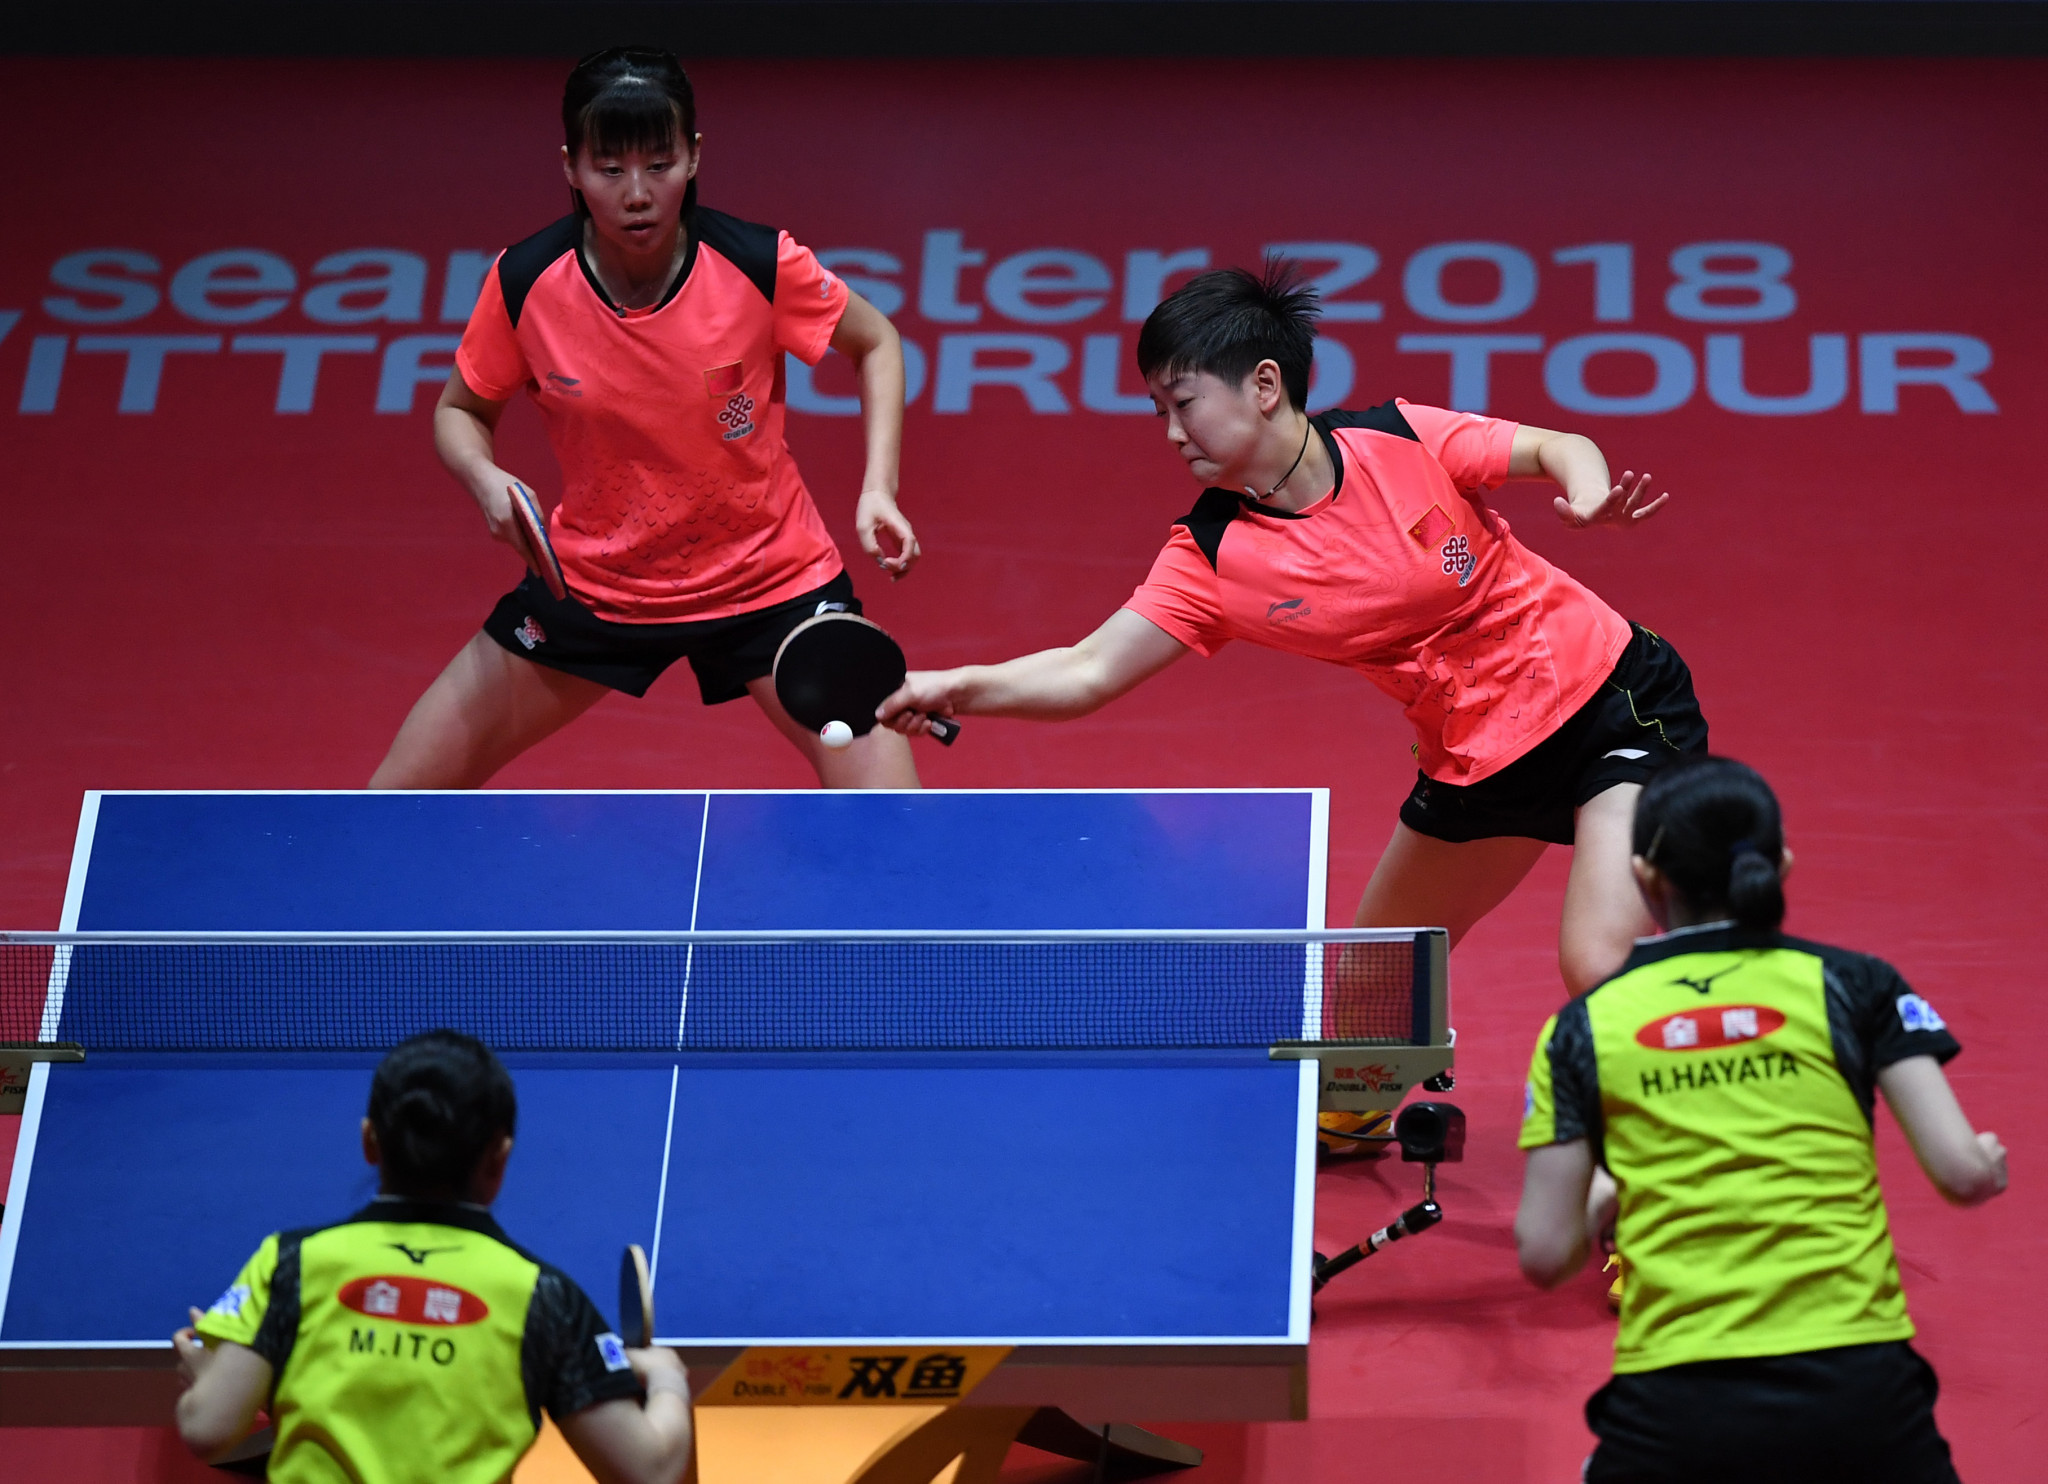 ITTF post record-breaking audience and engagement numbers for 2018